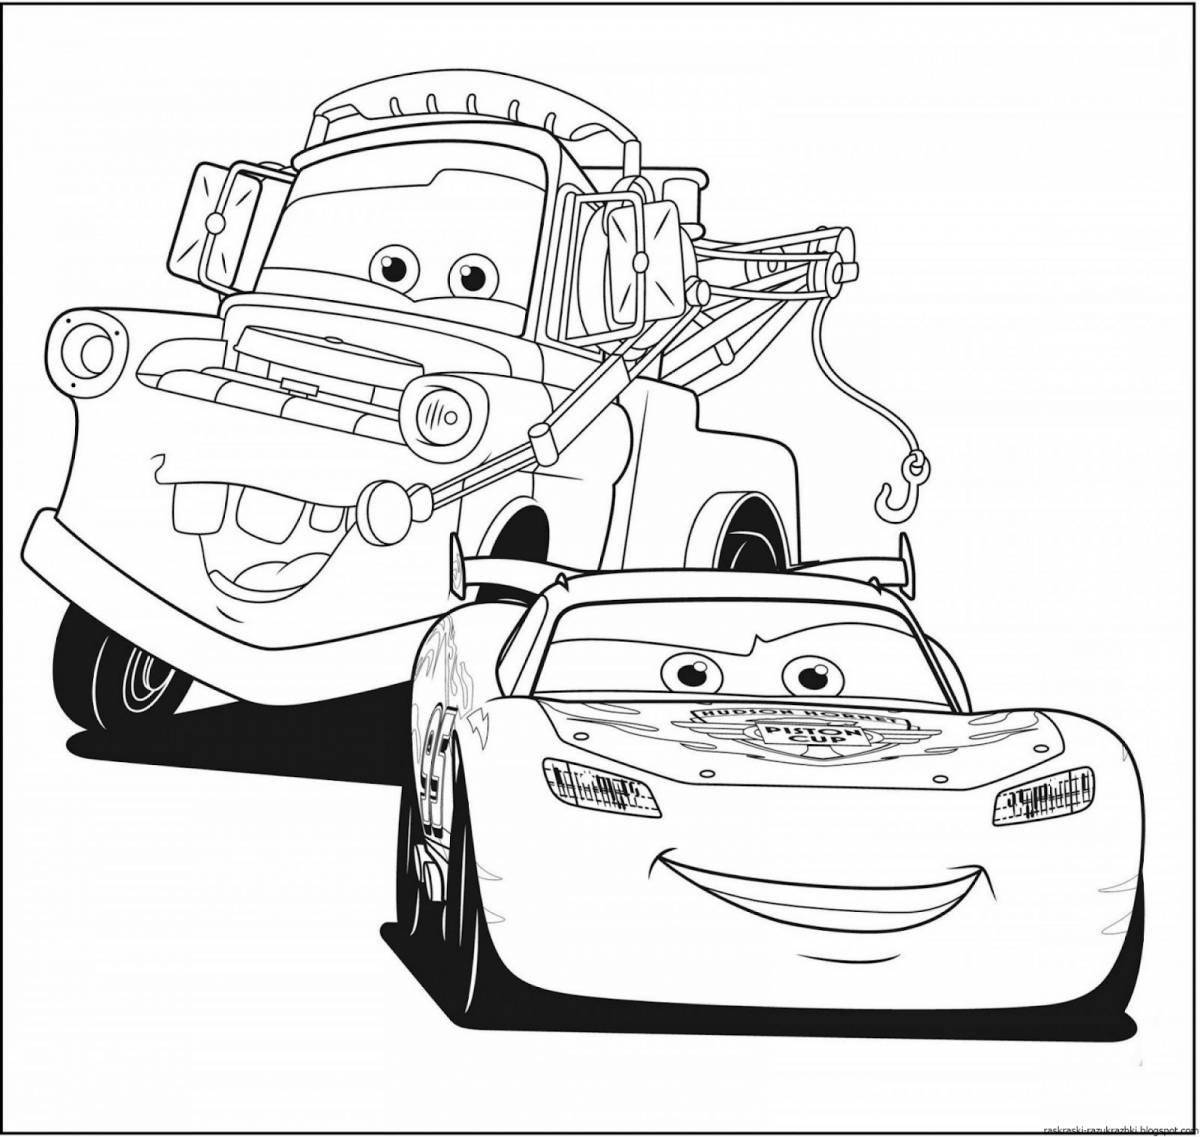 Charming cars mcqueen coloring page